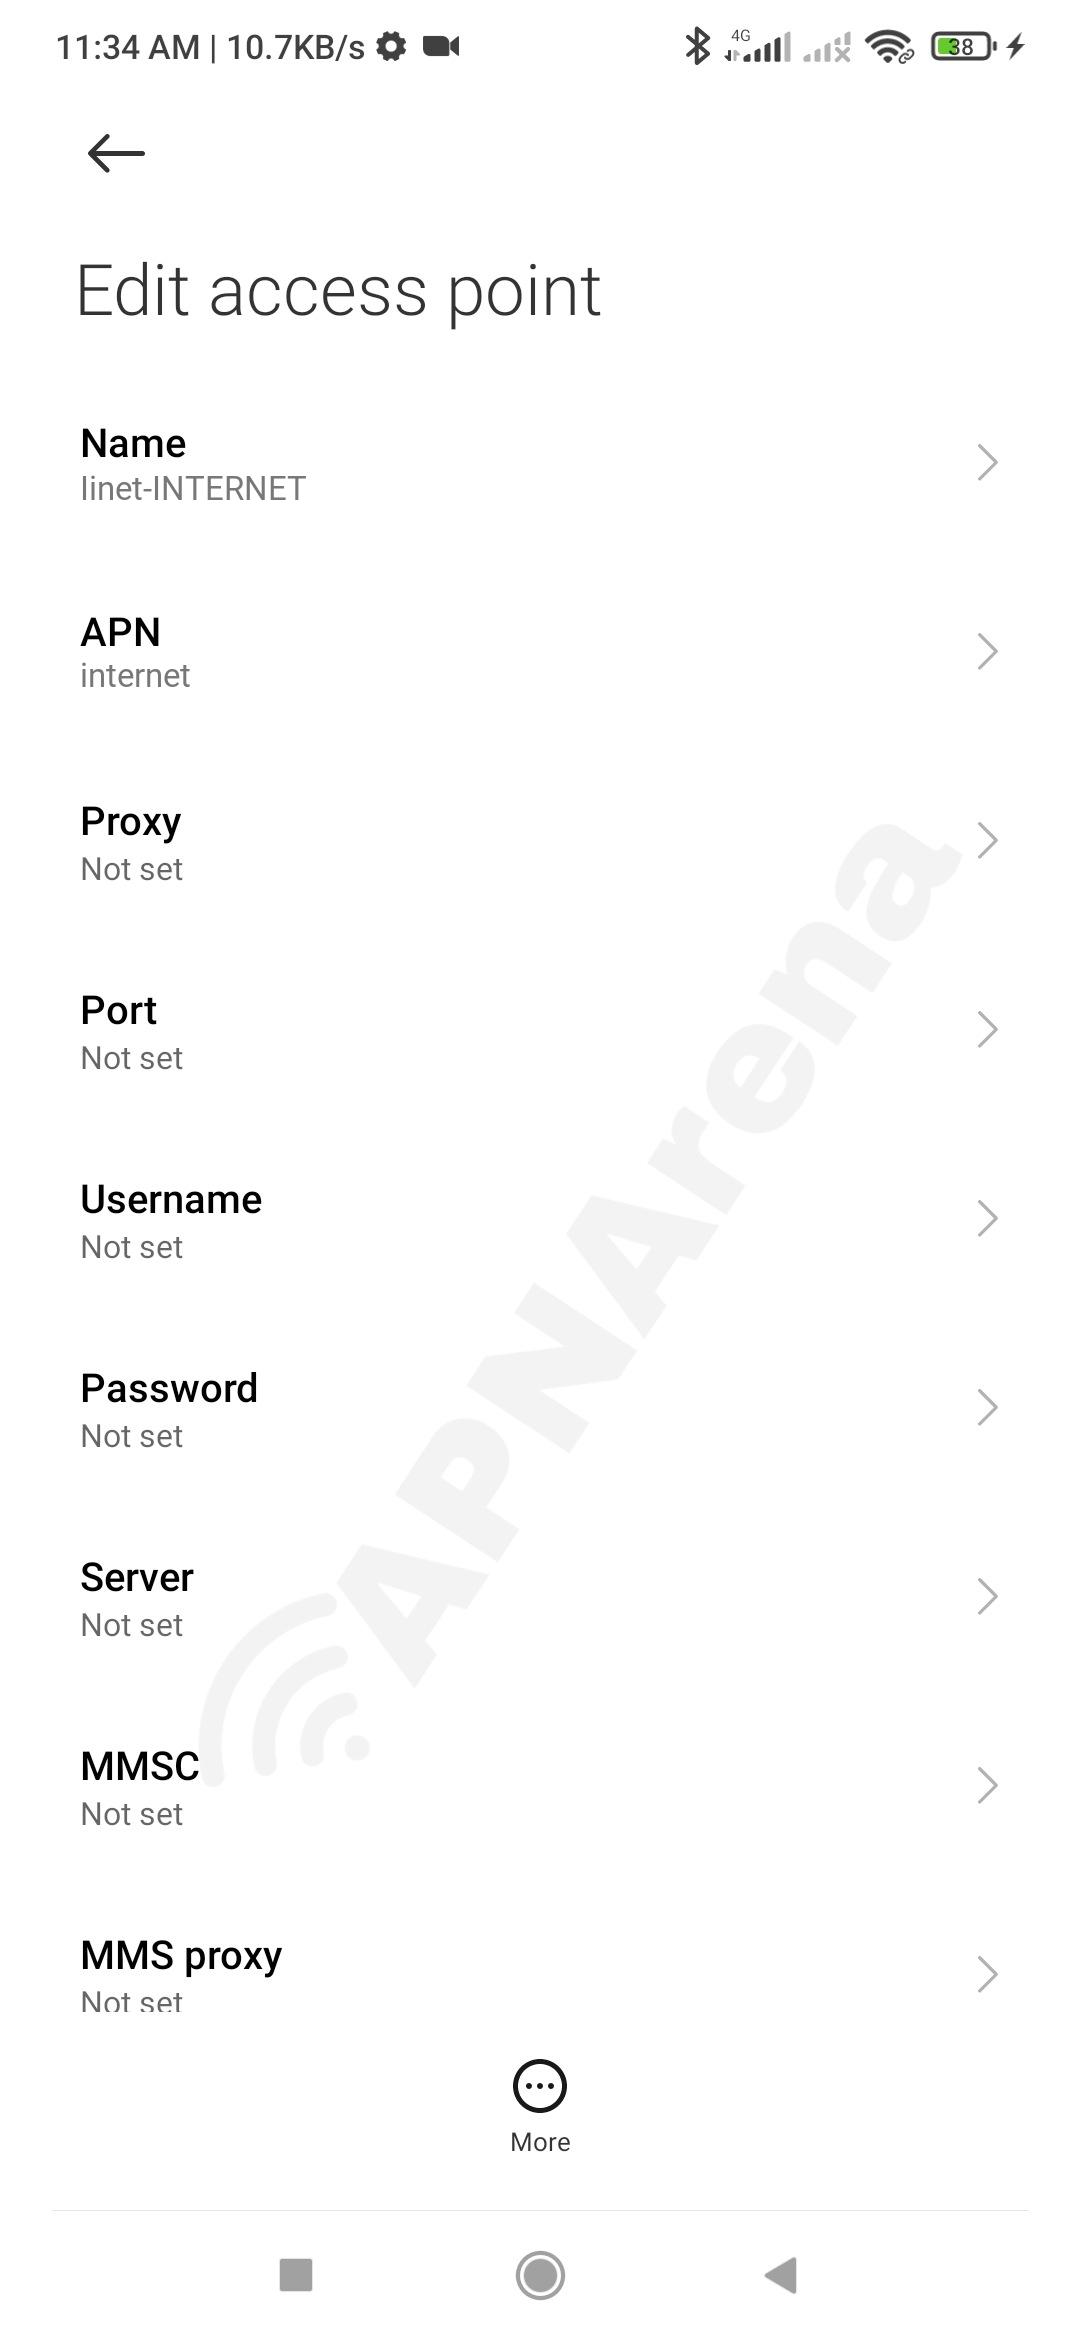 iiNet APN Settings for Android